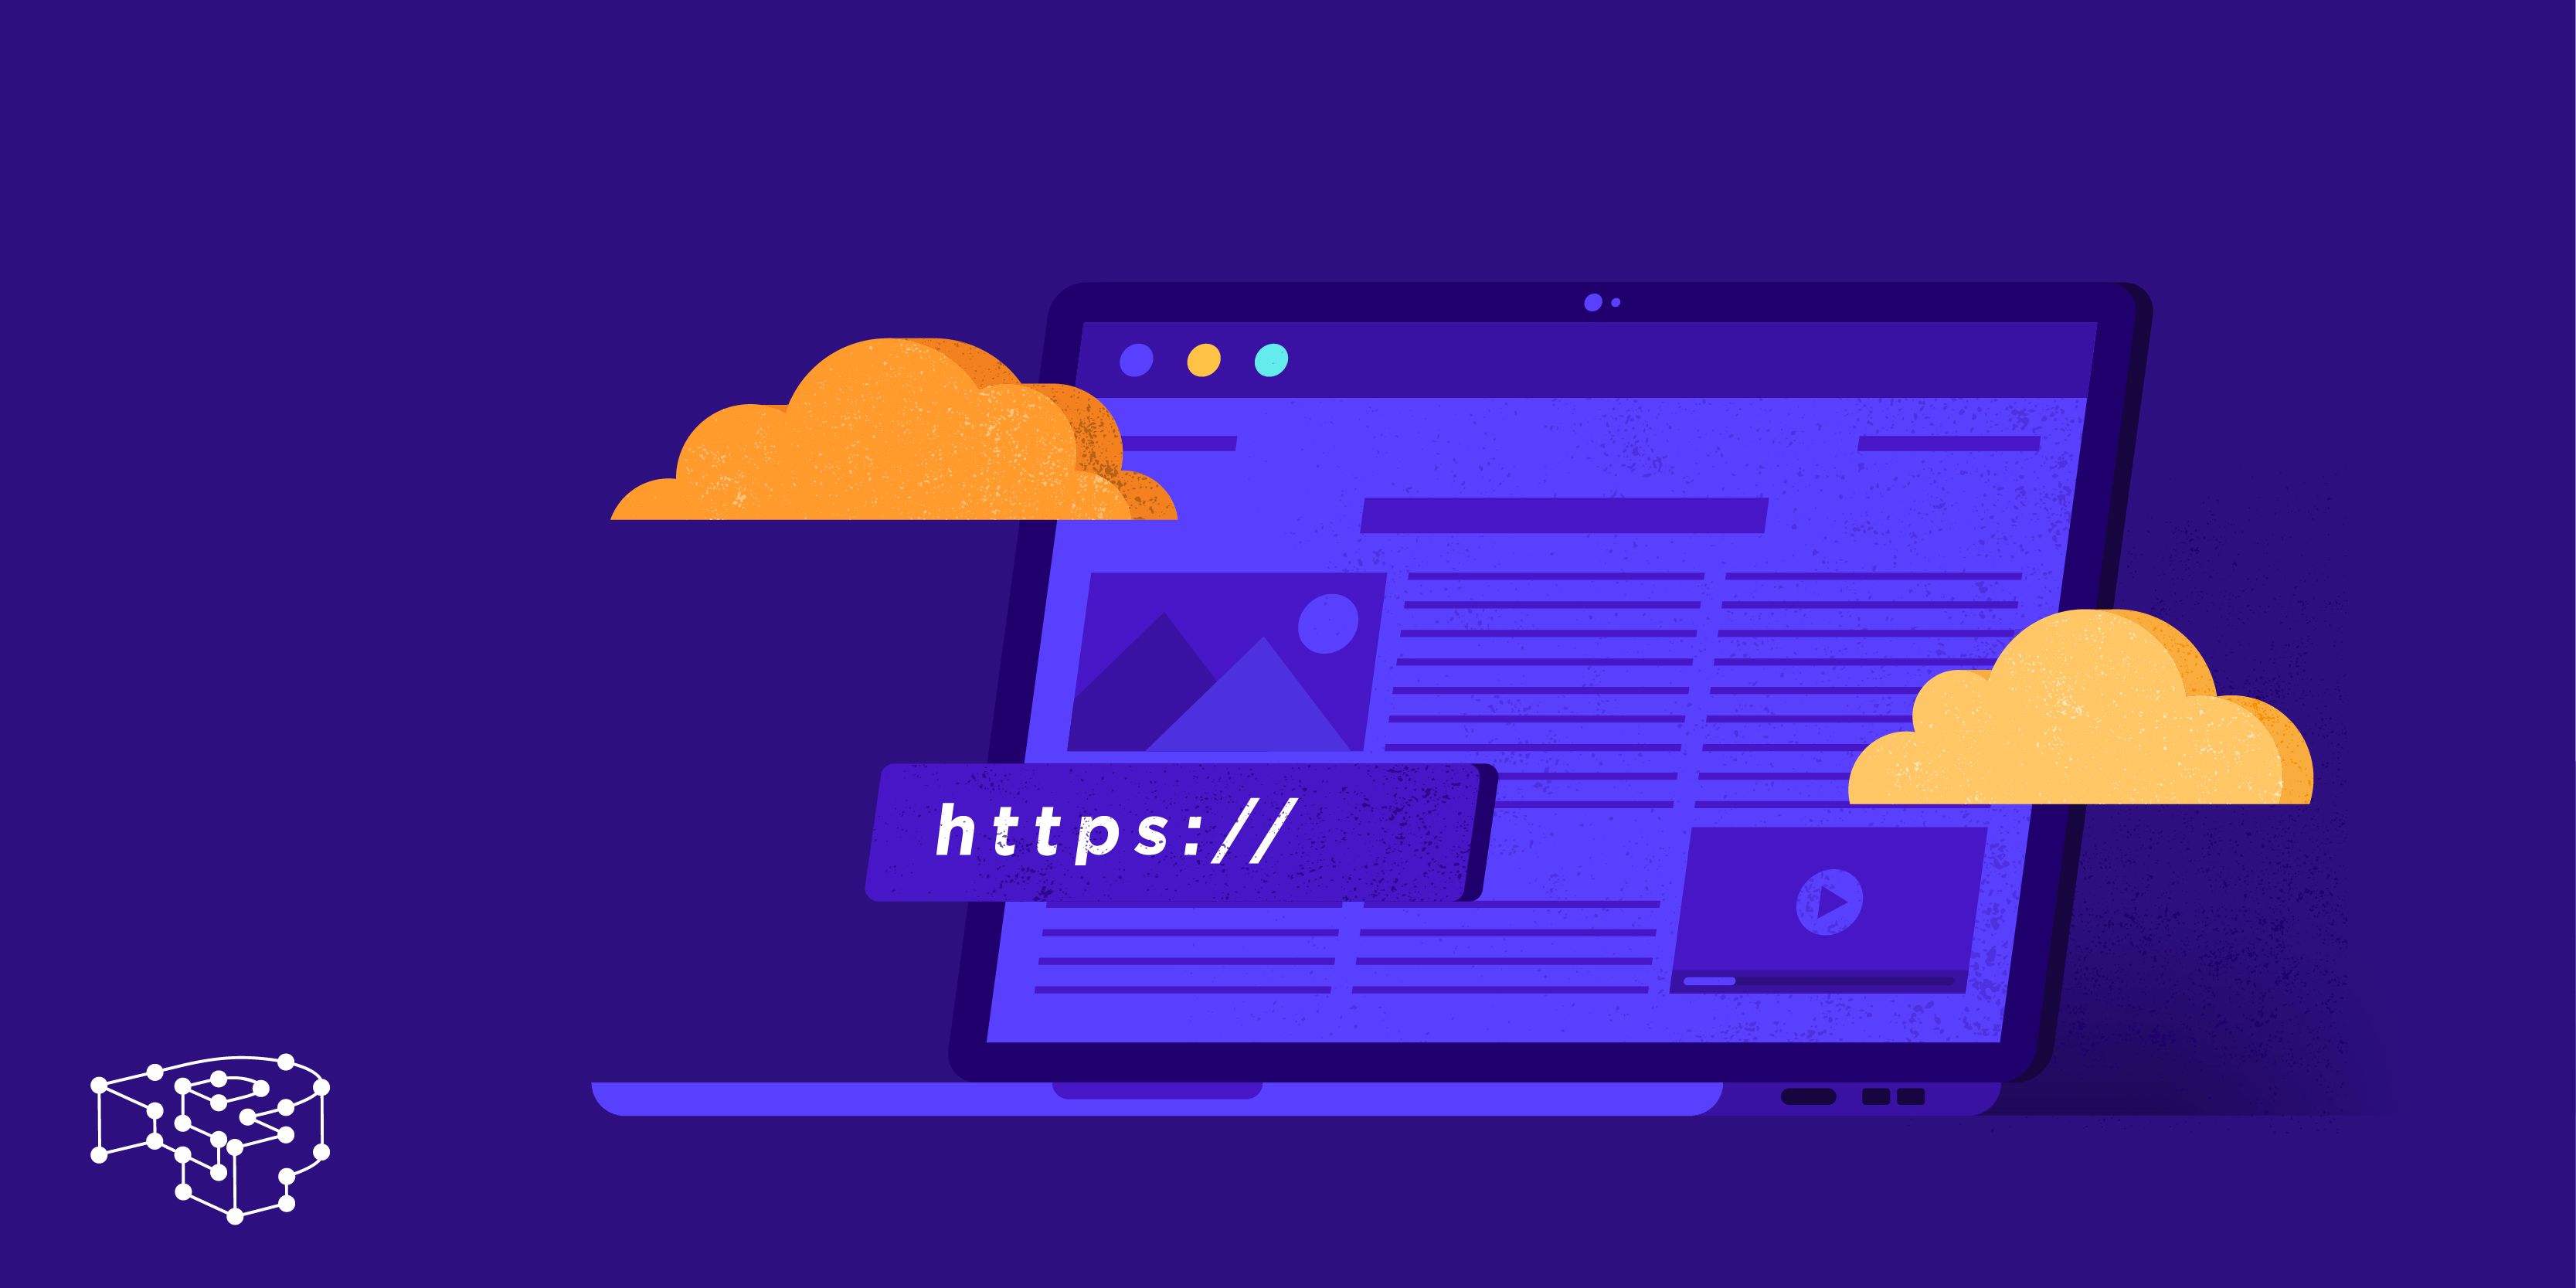 How to Use Cloudflare to Manage Your DNS